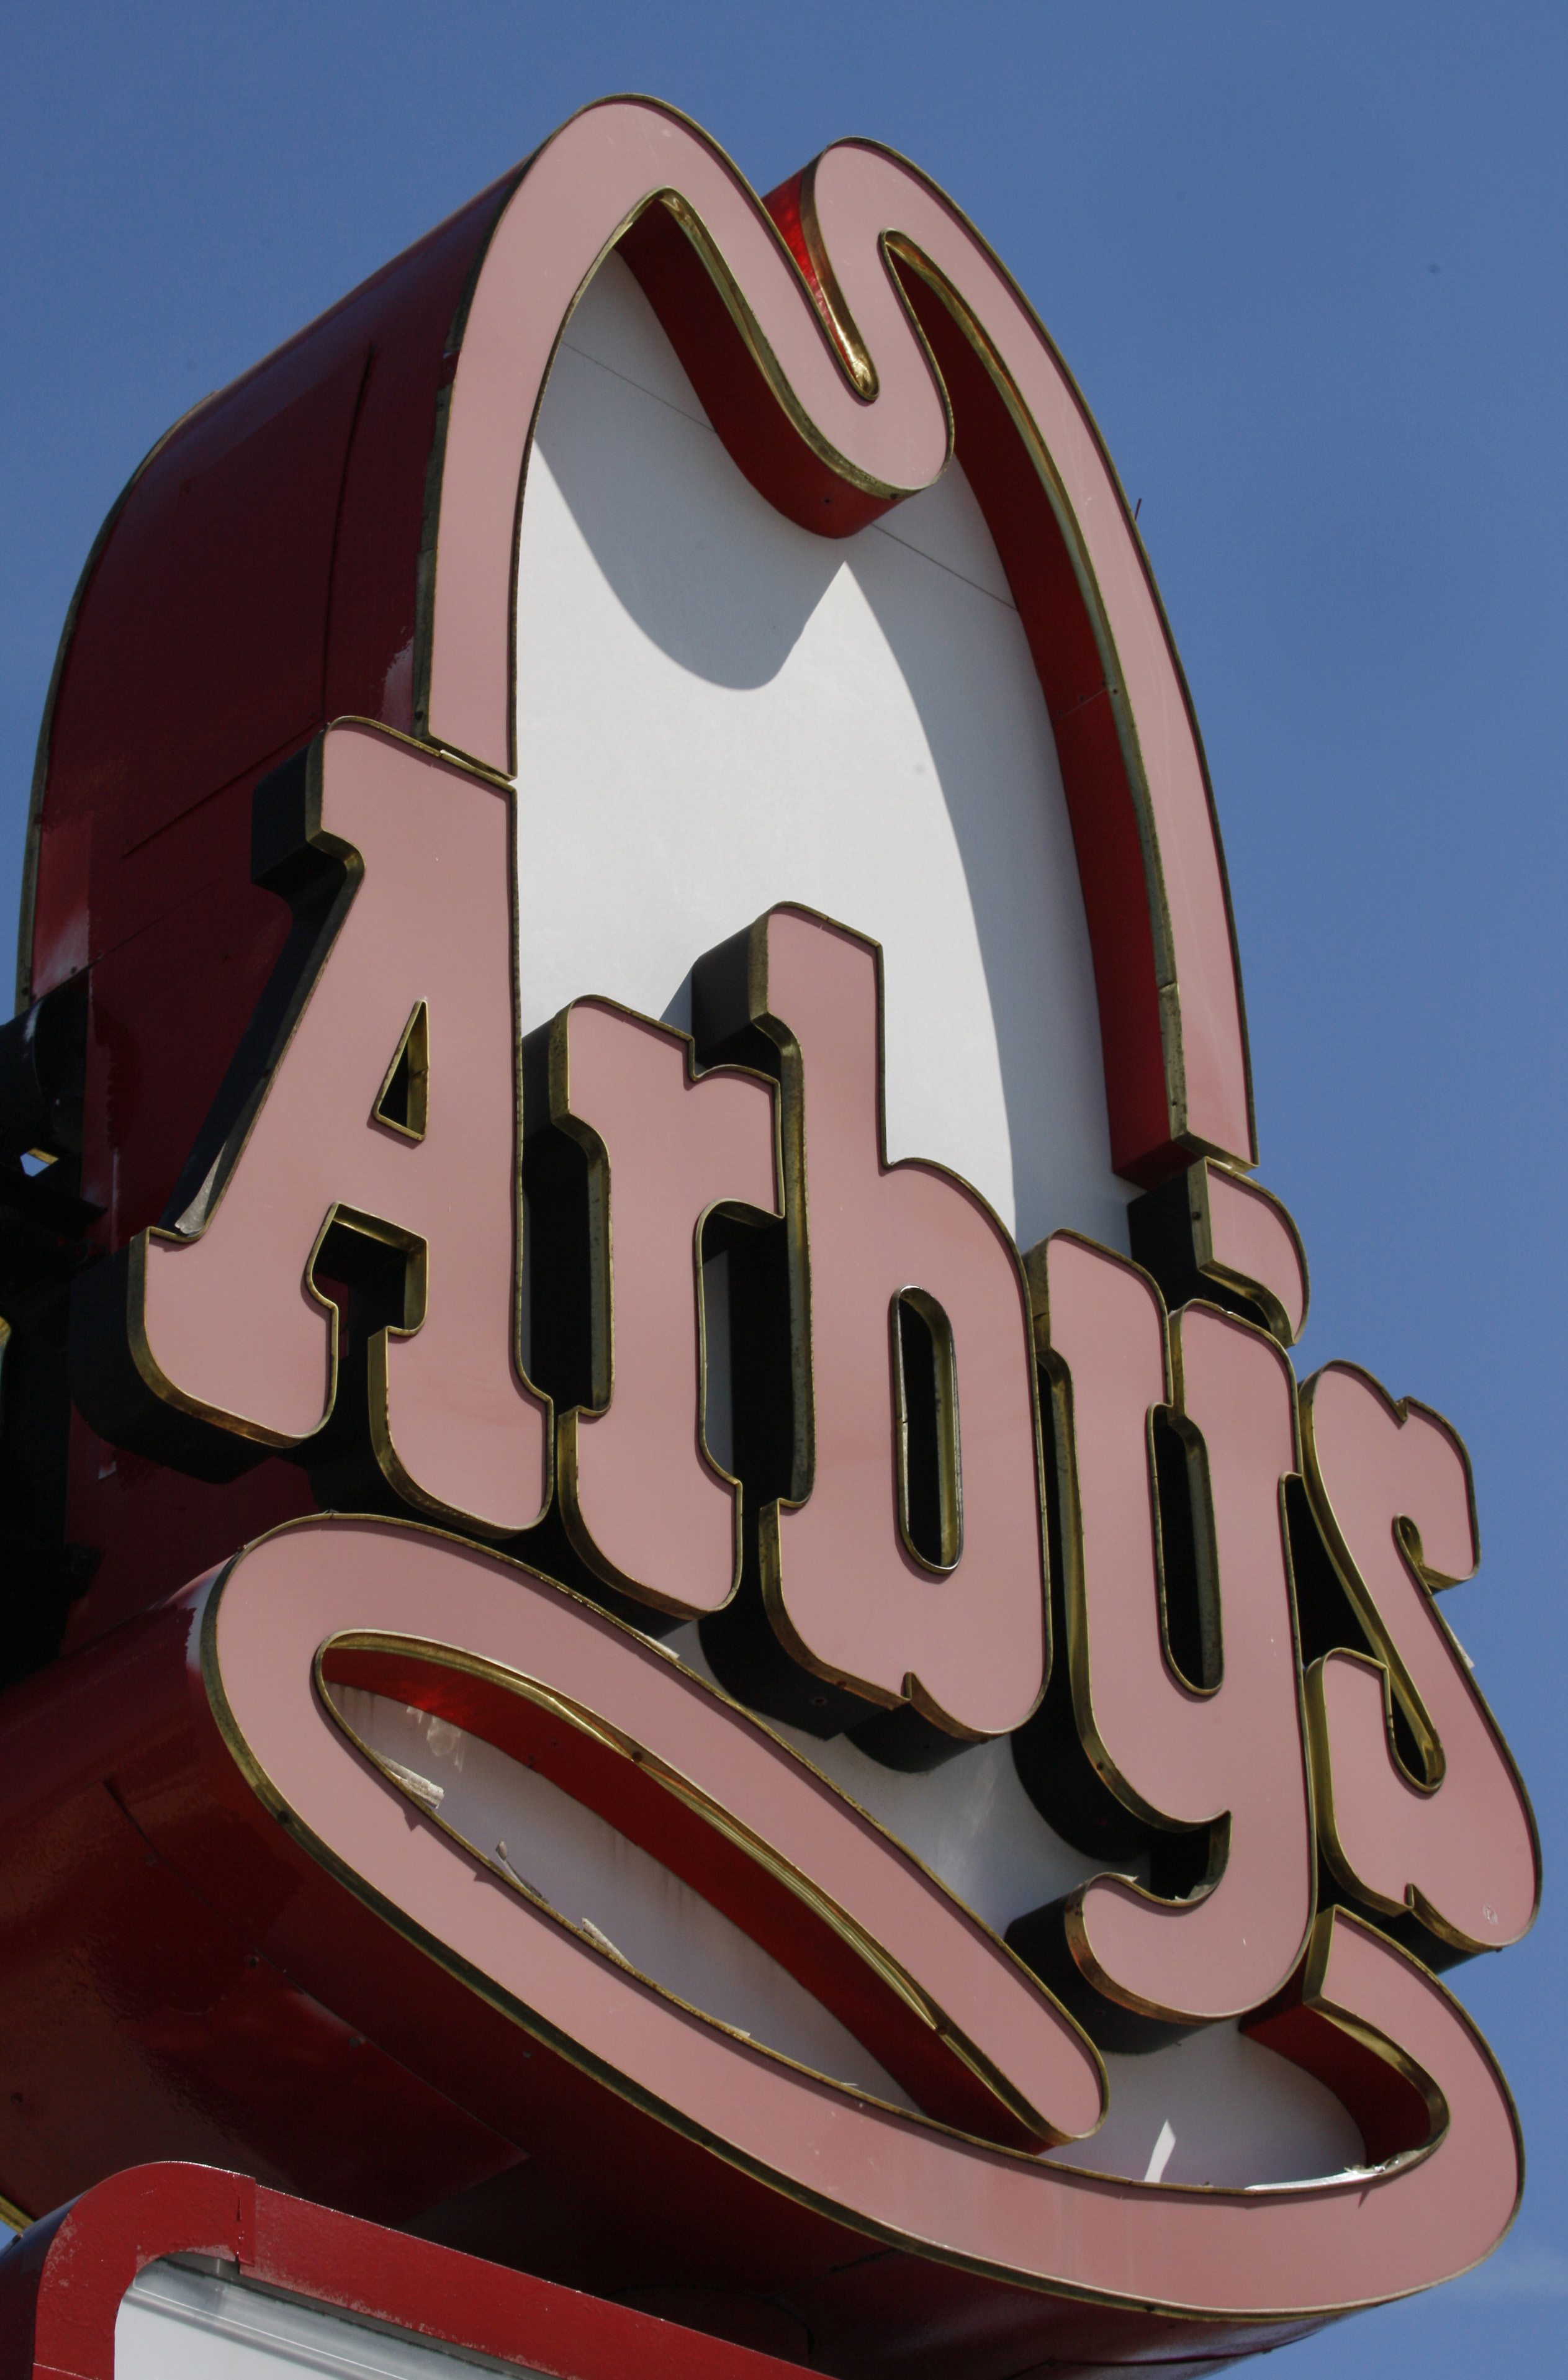 An Arby's restaurant sign is displayed in Cutler Bay, Fla. on March 1, 2010. (Wilfredo Lee—AP)